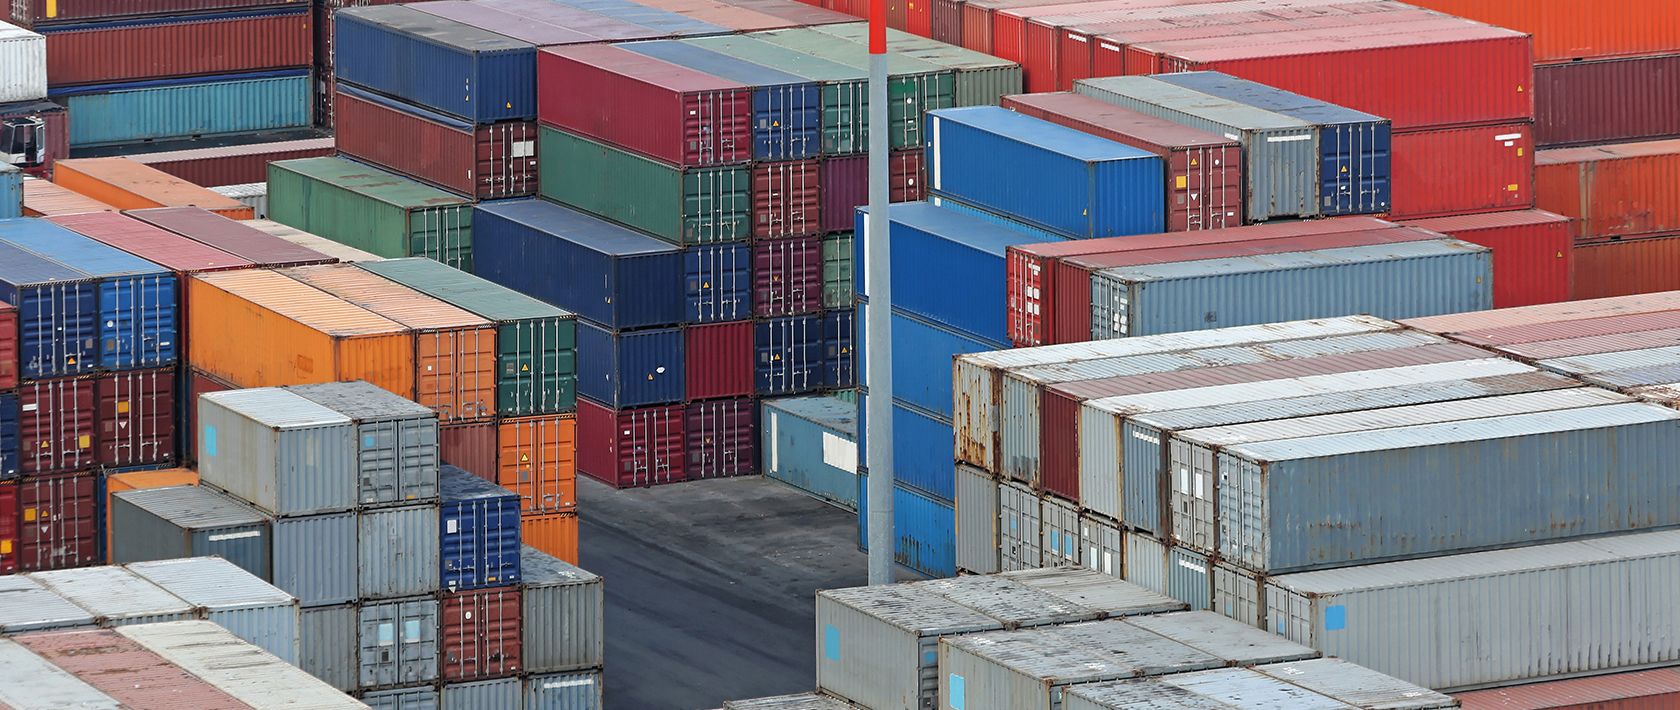 How are containers influencing the world of software testing?